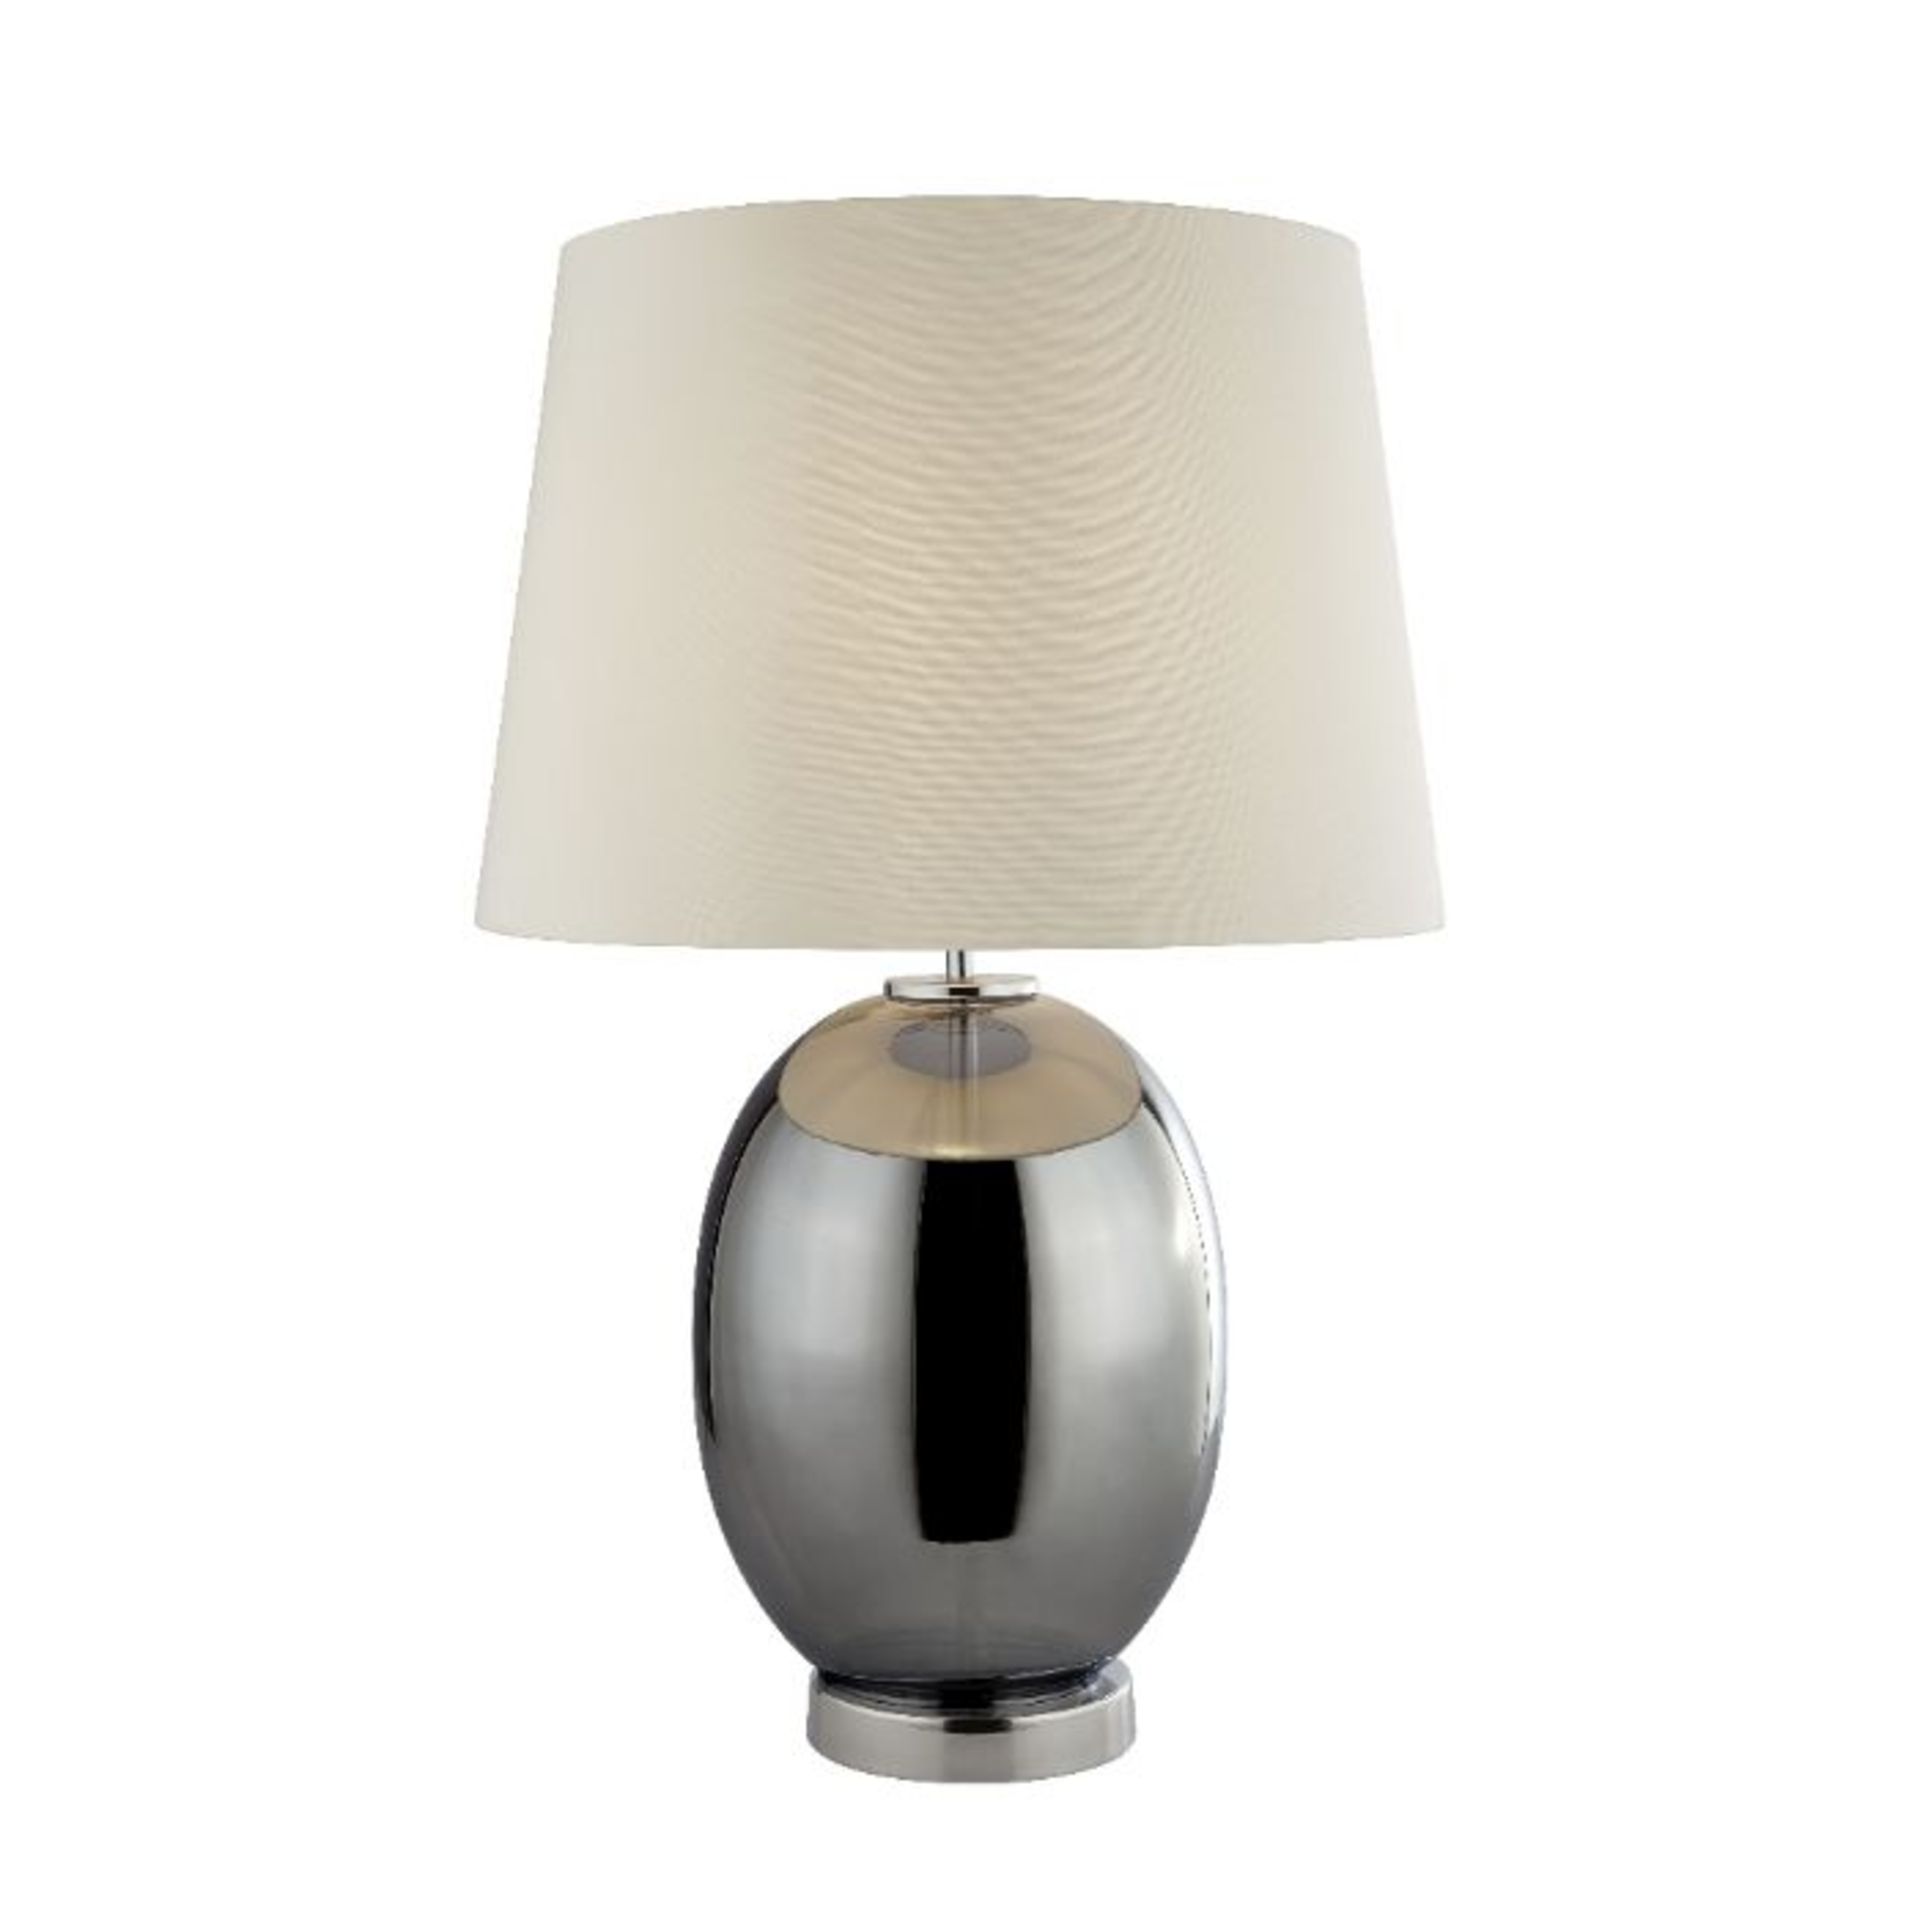 BRAND NEW SMOKED GLASS TABLE LAMP WITH WHITE FABRIC SHADE. 59CM HIGH. 60W. - Contemporary table lamp